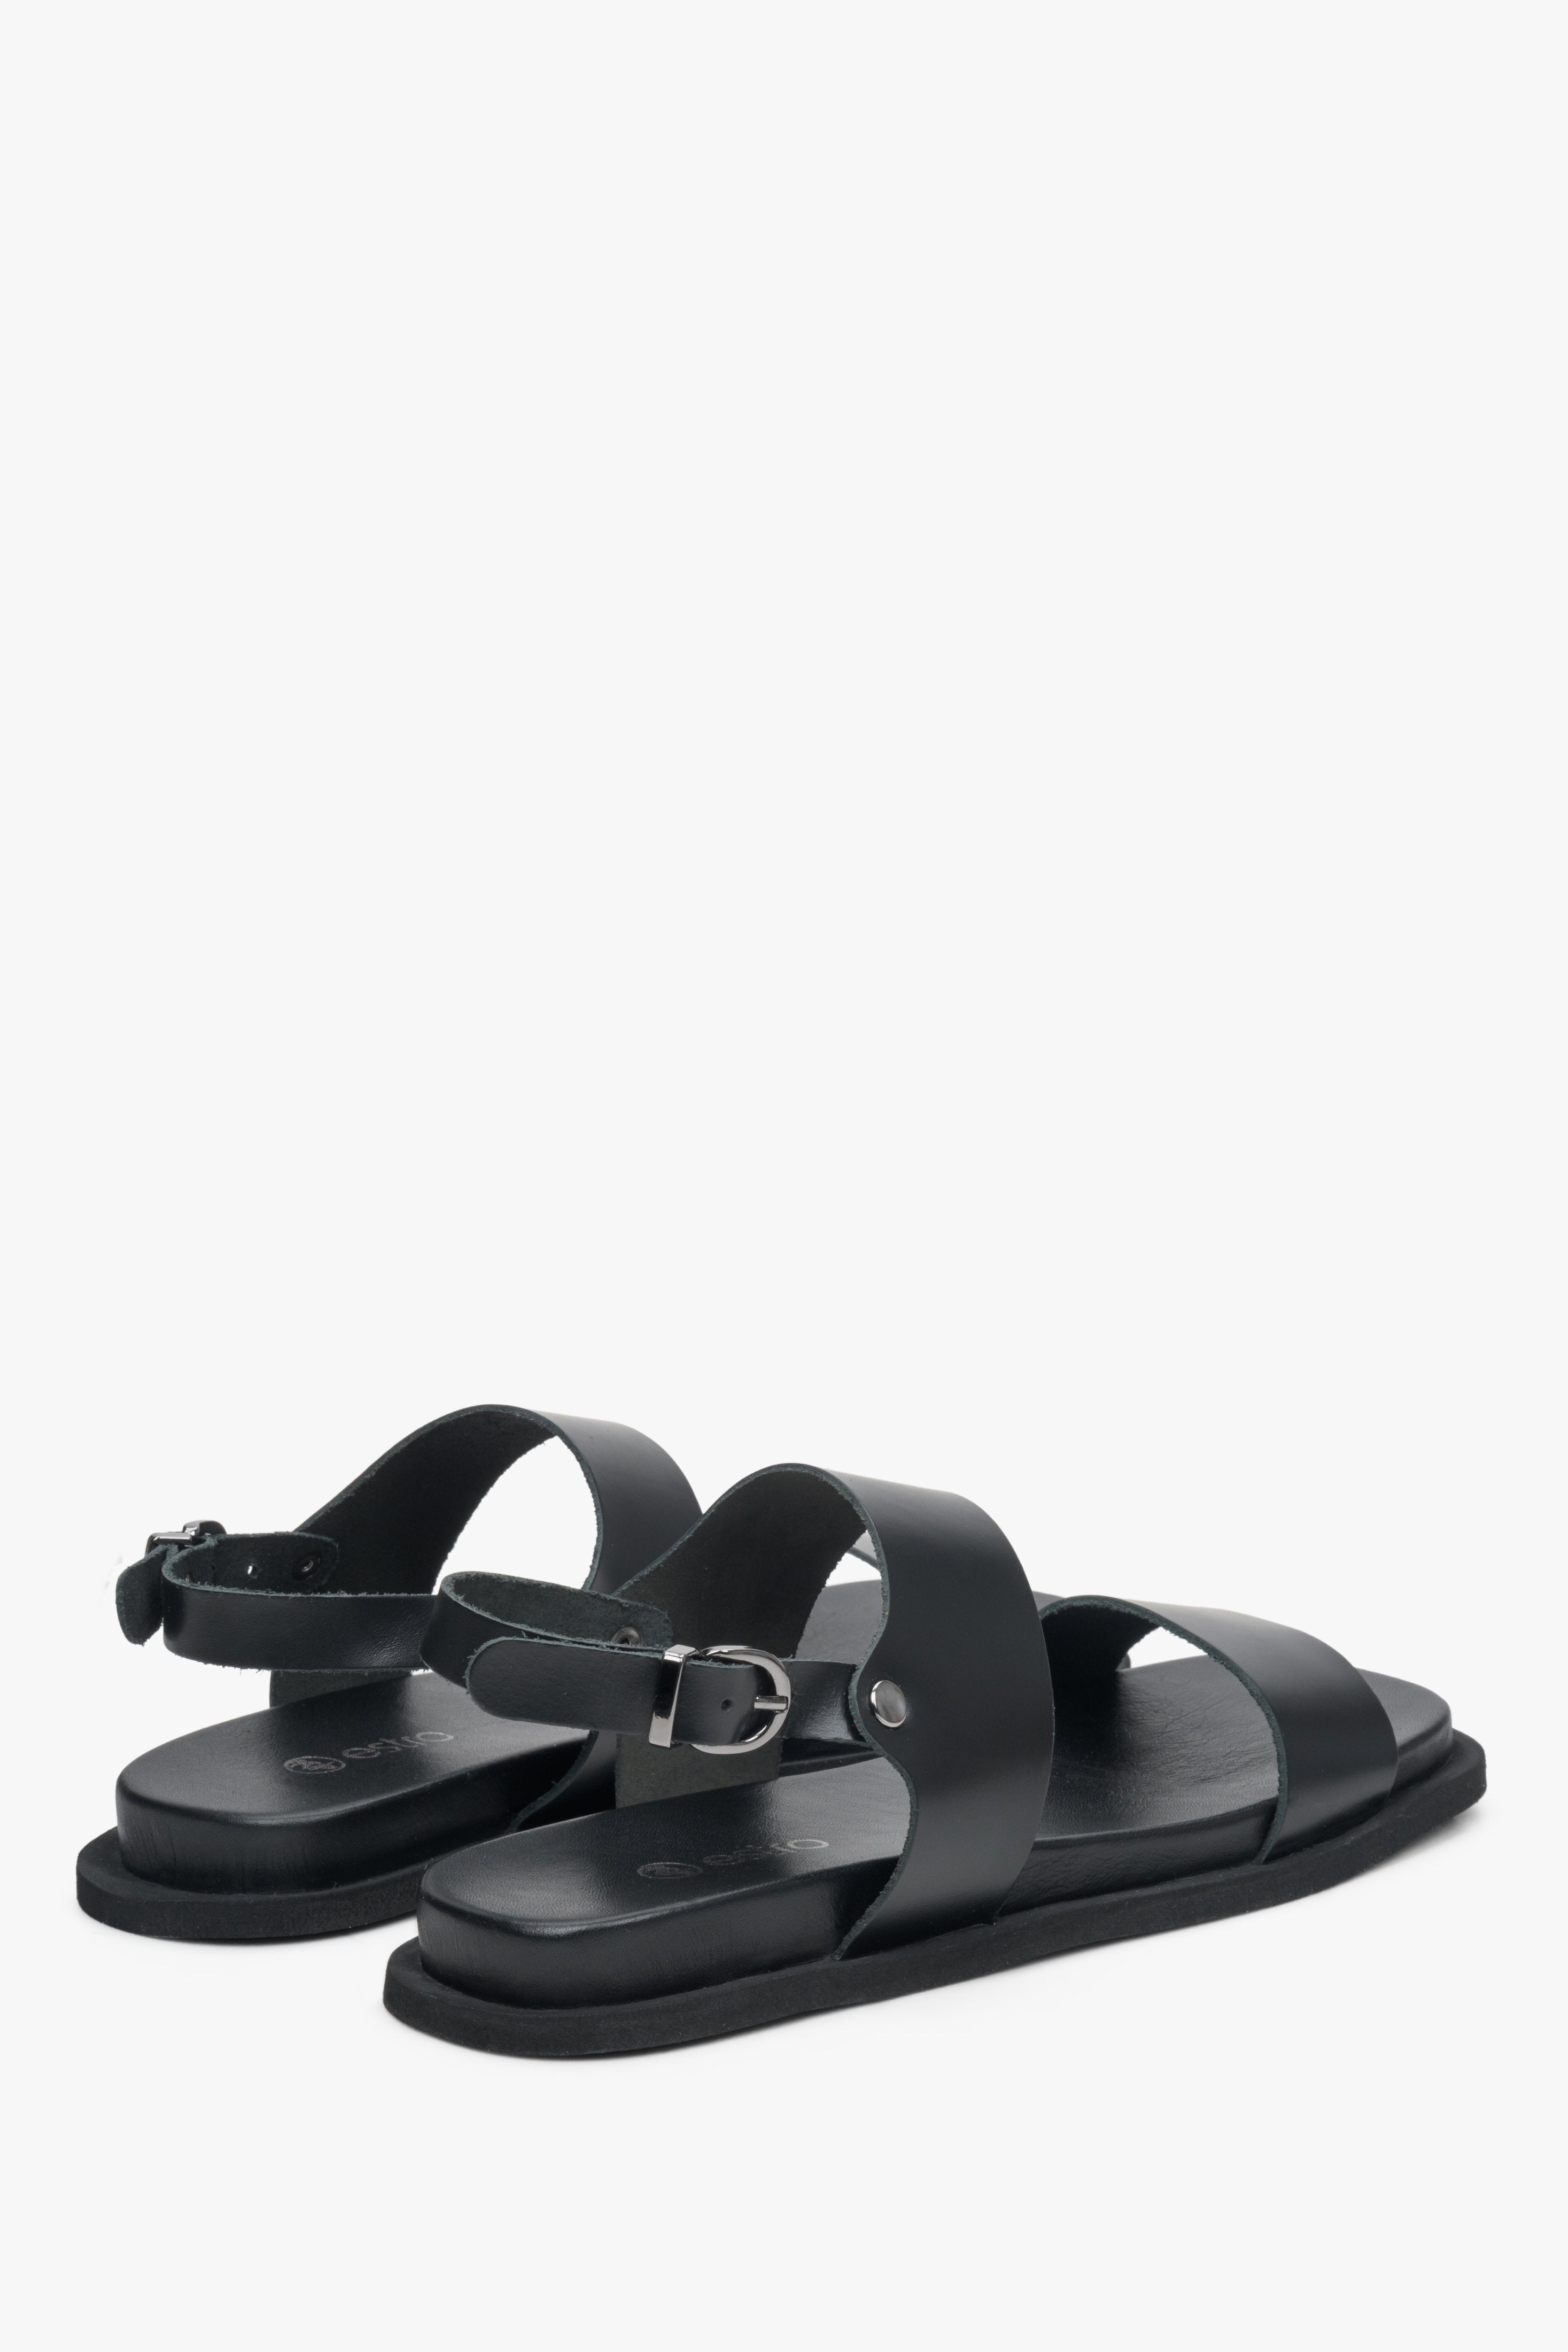 Estro leather women's flat heel sandals with a buckle - presentation of the back of the shoes in black.